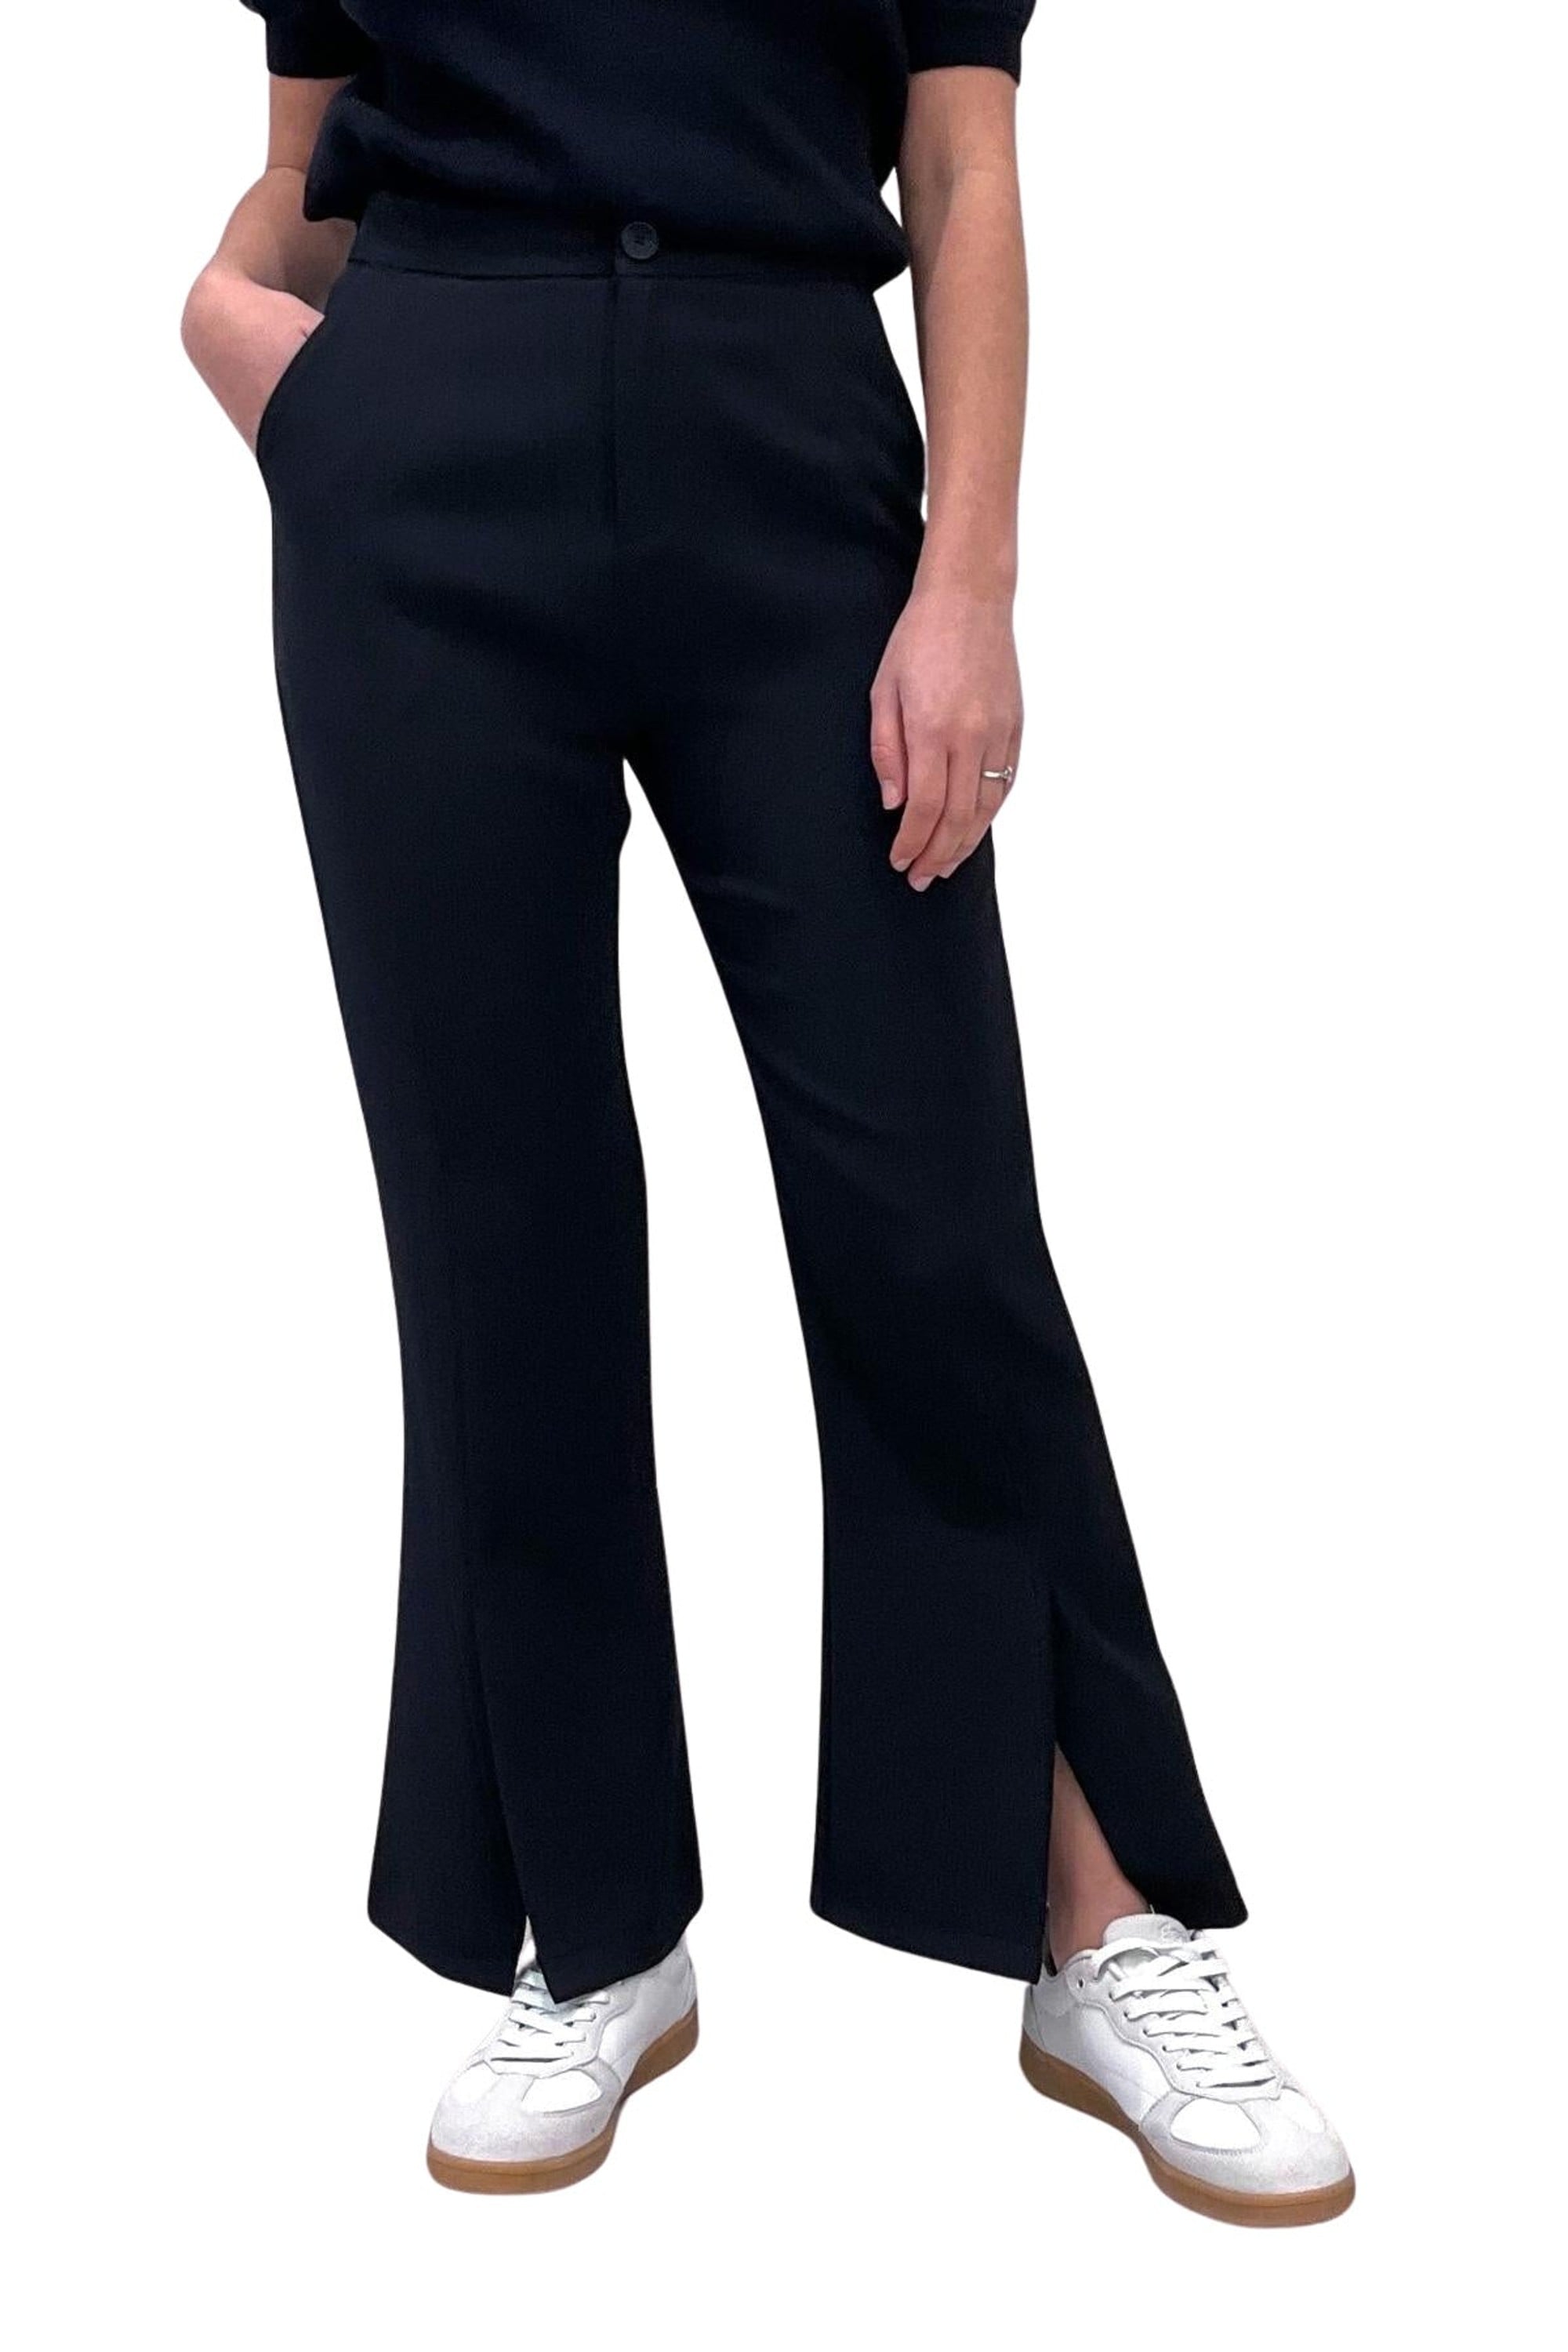 Clever Alice Front Slit Pant - clever alice